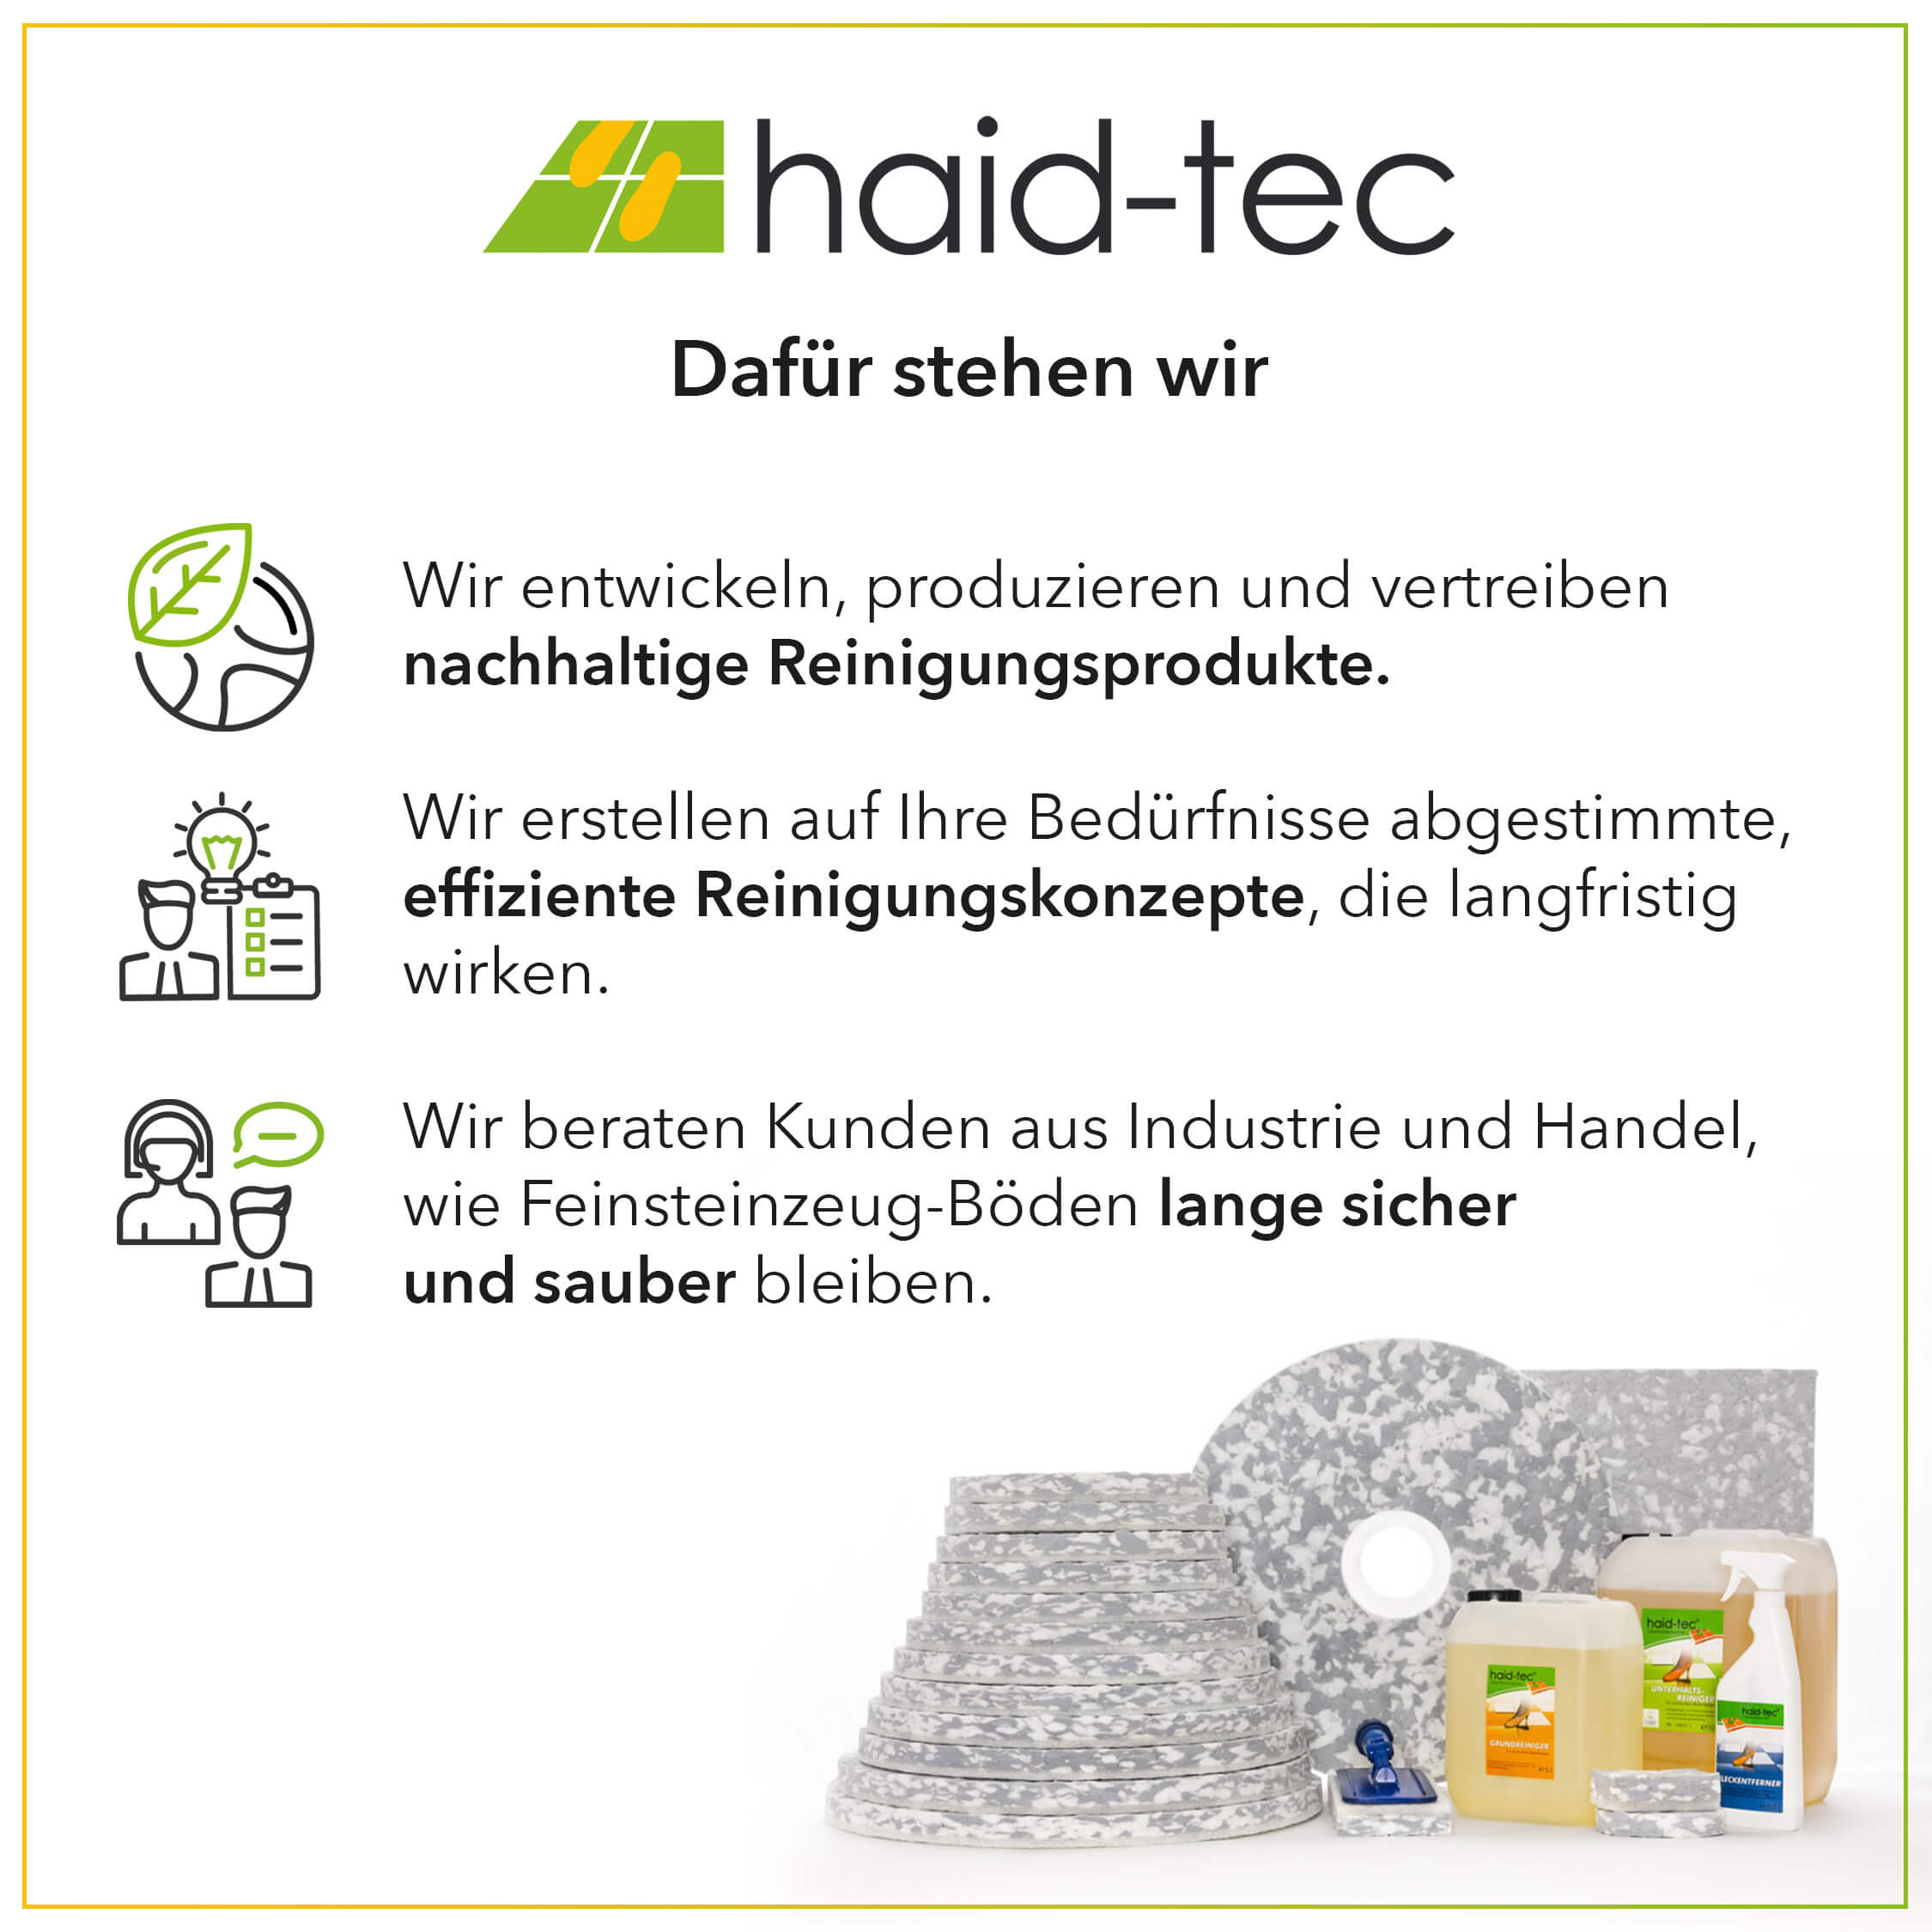 haid-tec Workshop cleaner 10 L, oil stain remover, industrial cleaner - concentrate - biodegradable - made in Germany